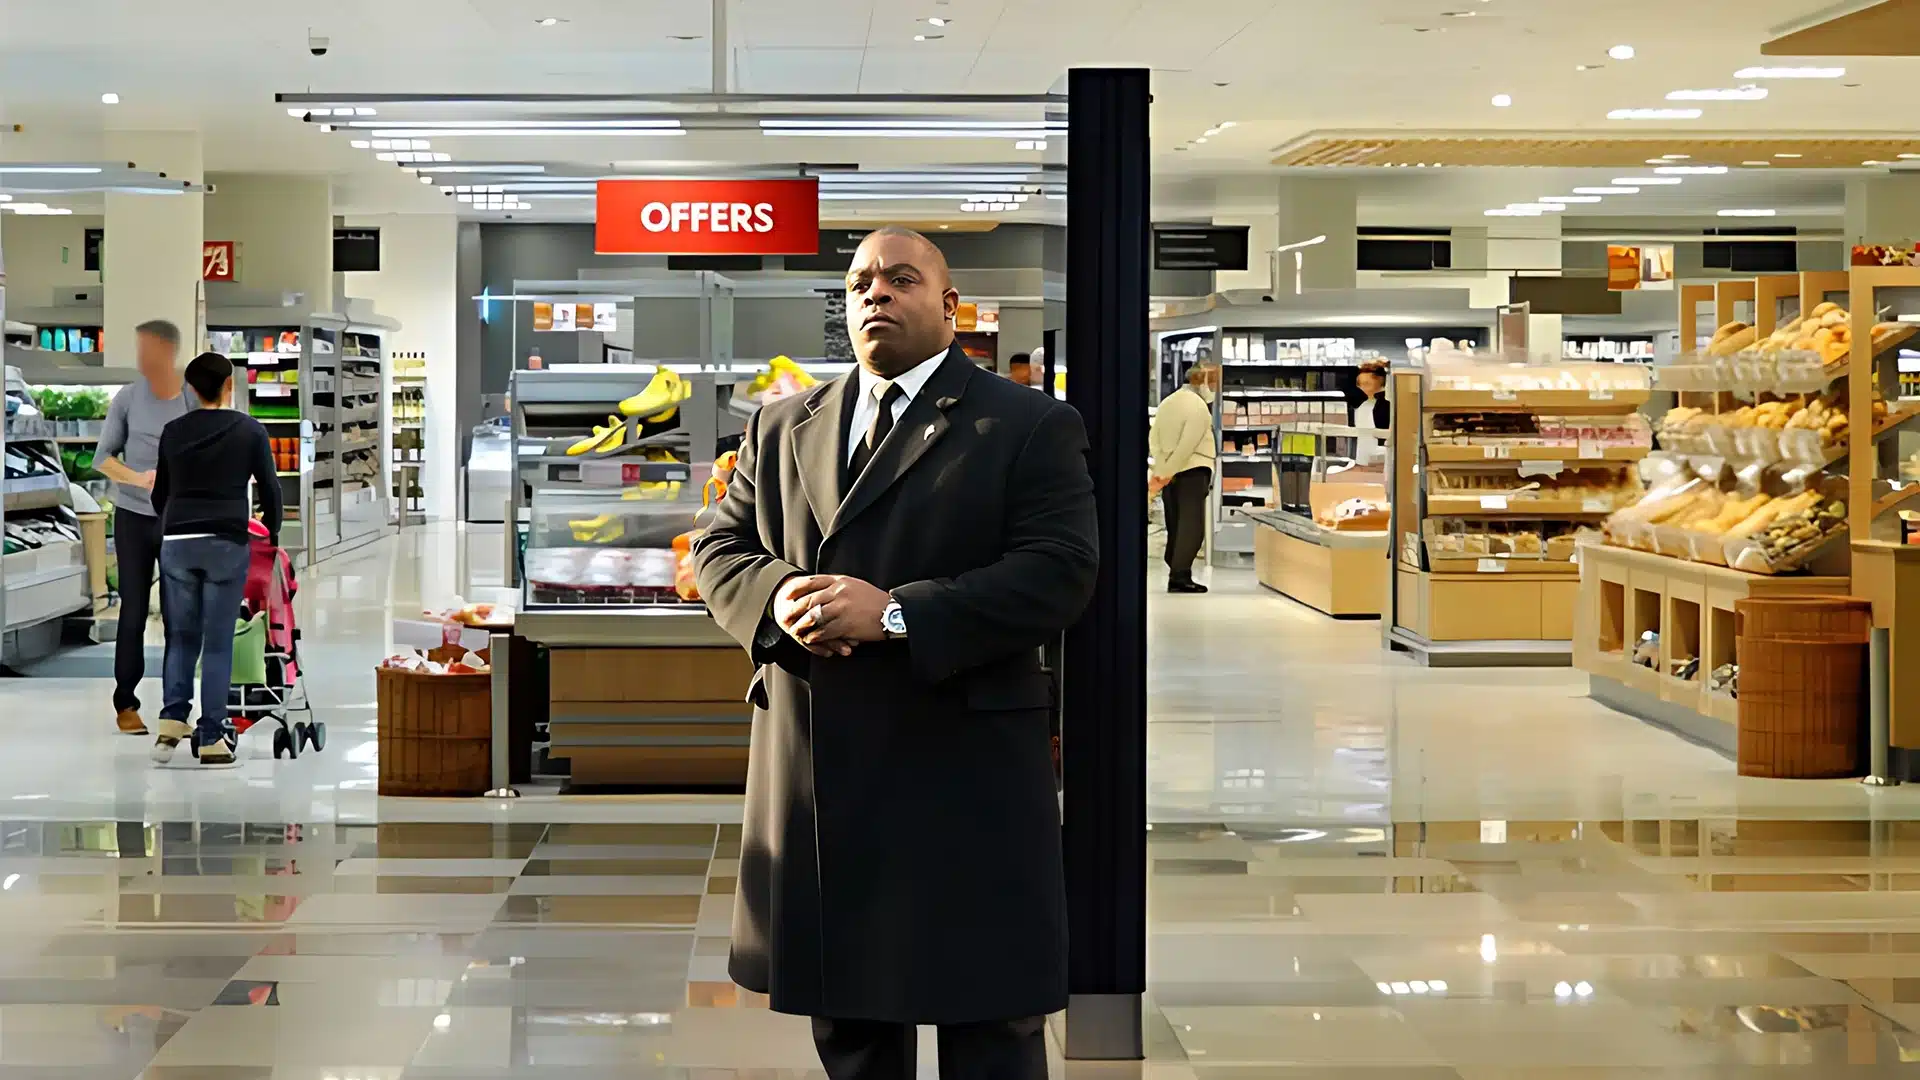 SIA licensed corporate guard from Guard Mark monitors retail store activities, ensuring safety and security.